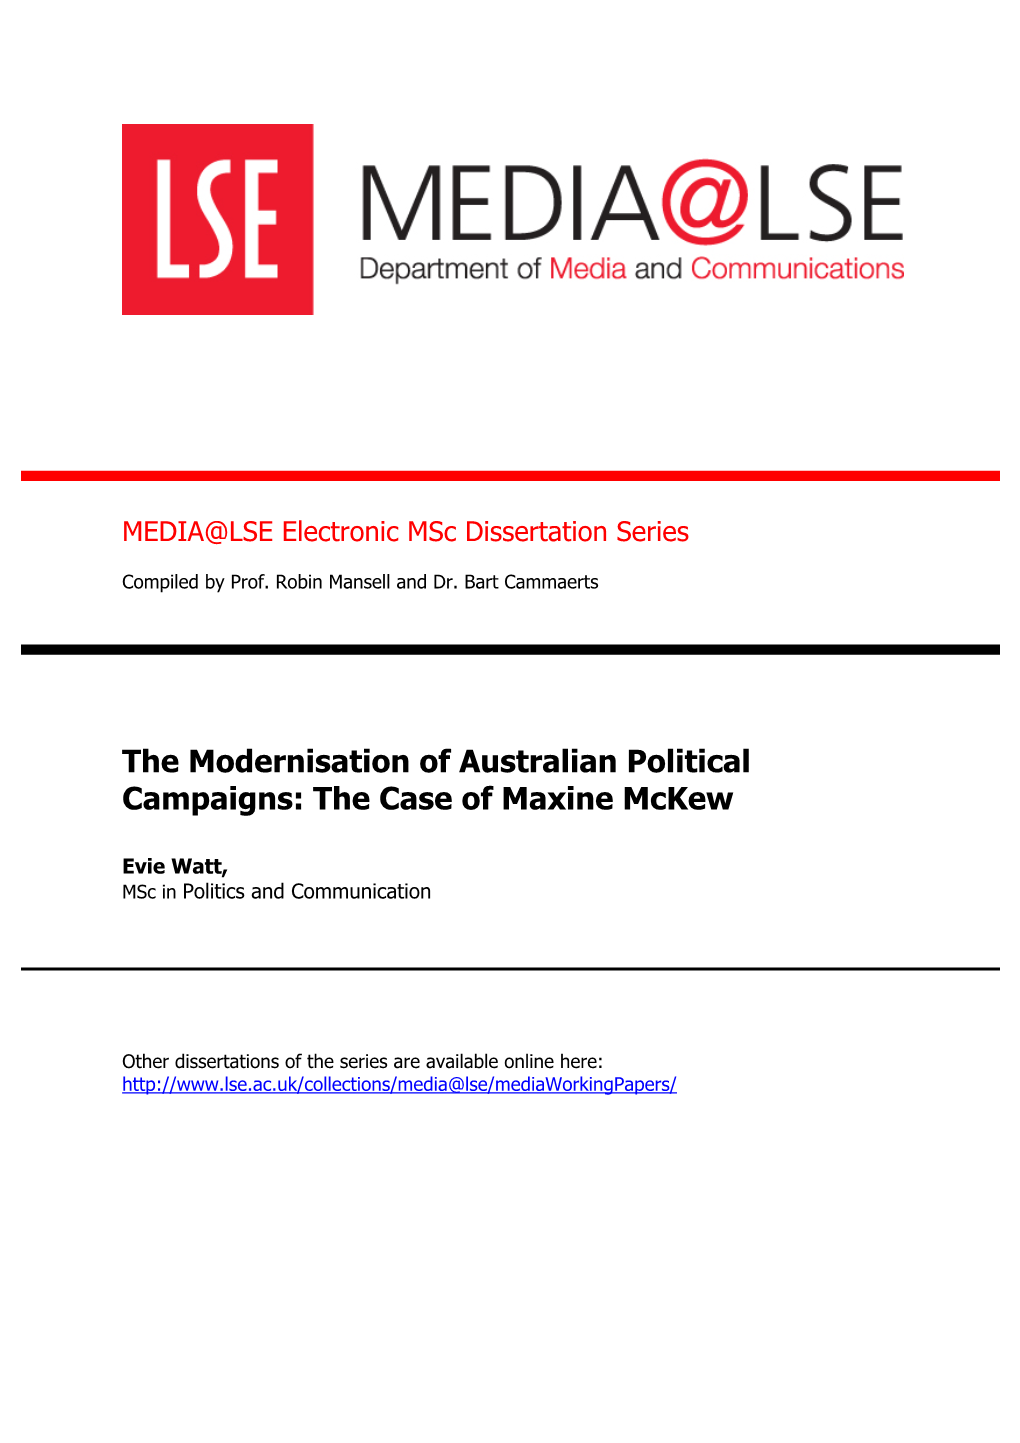 The Modernisation of Australian Political Campaigns: the Case of Maxine Mckew